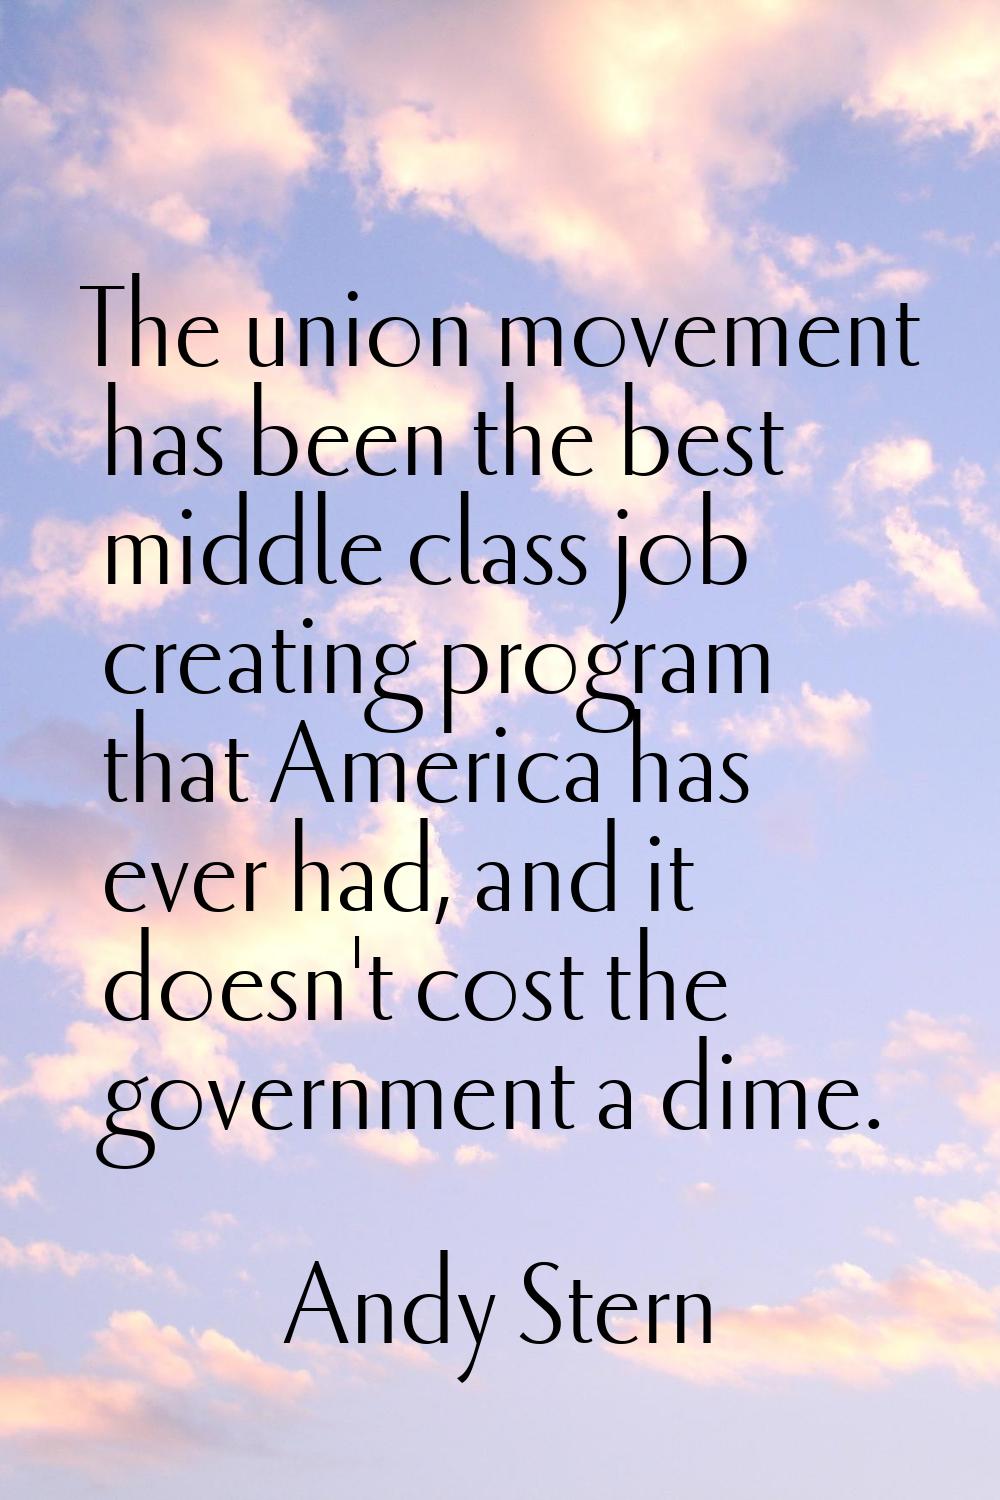 The union movement has been the best middle class job creating program that America has ever had, a